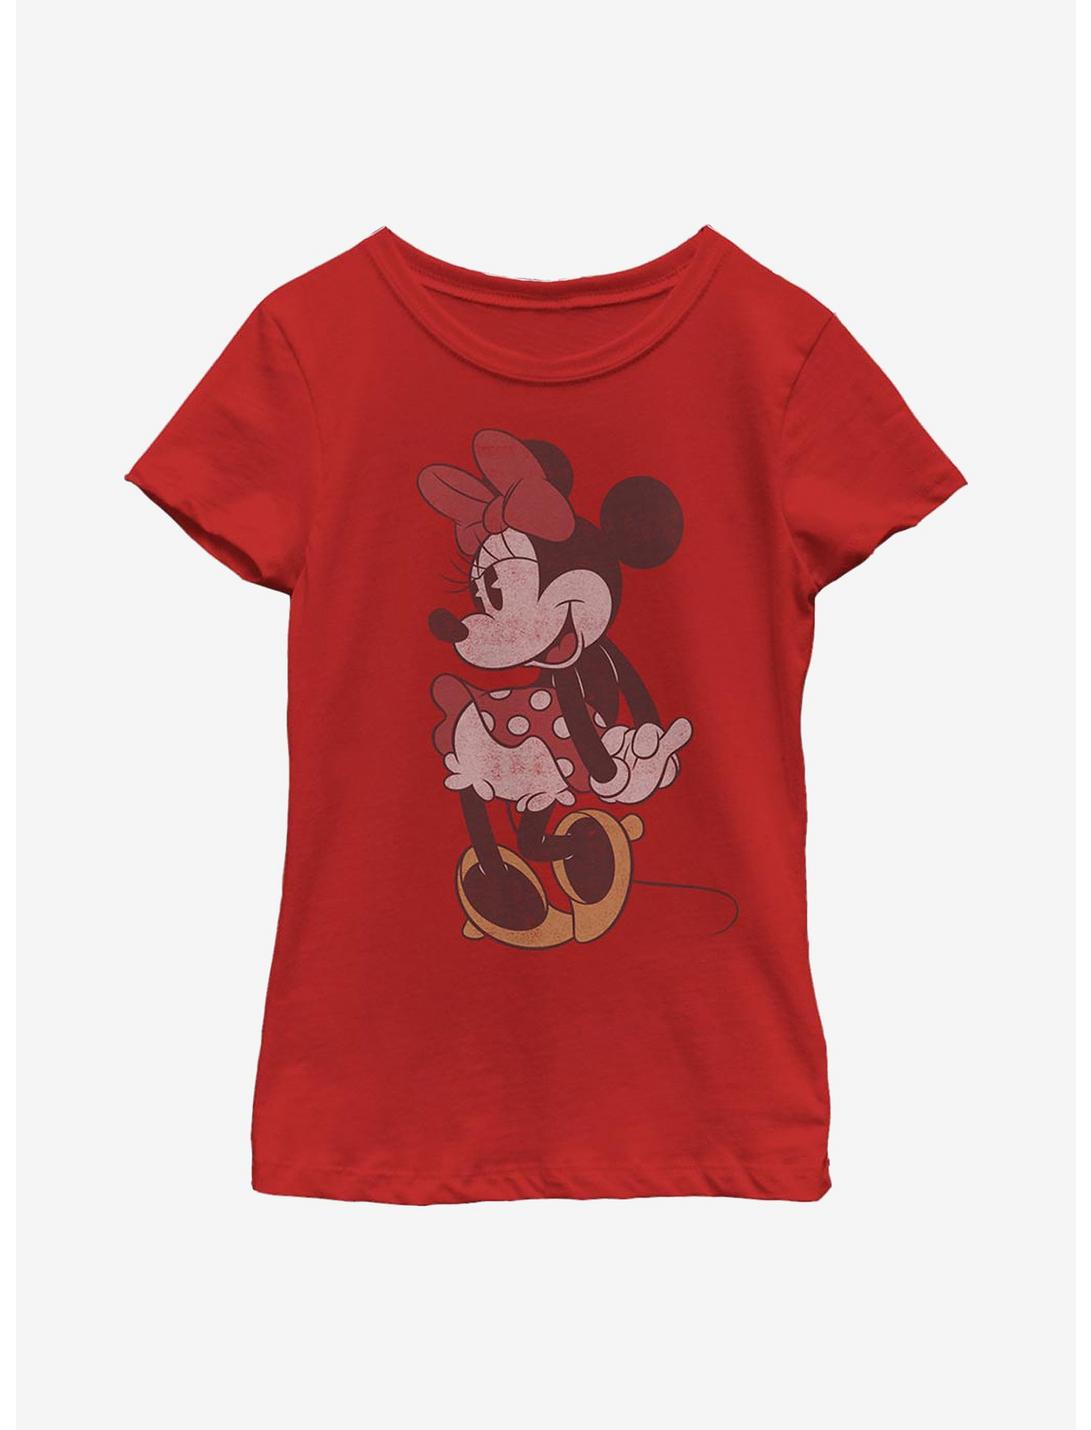 Disney Minnie Mouse Classic Vintage Minnie Youth Girls T-Shirt, RED, hi-res